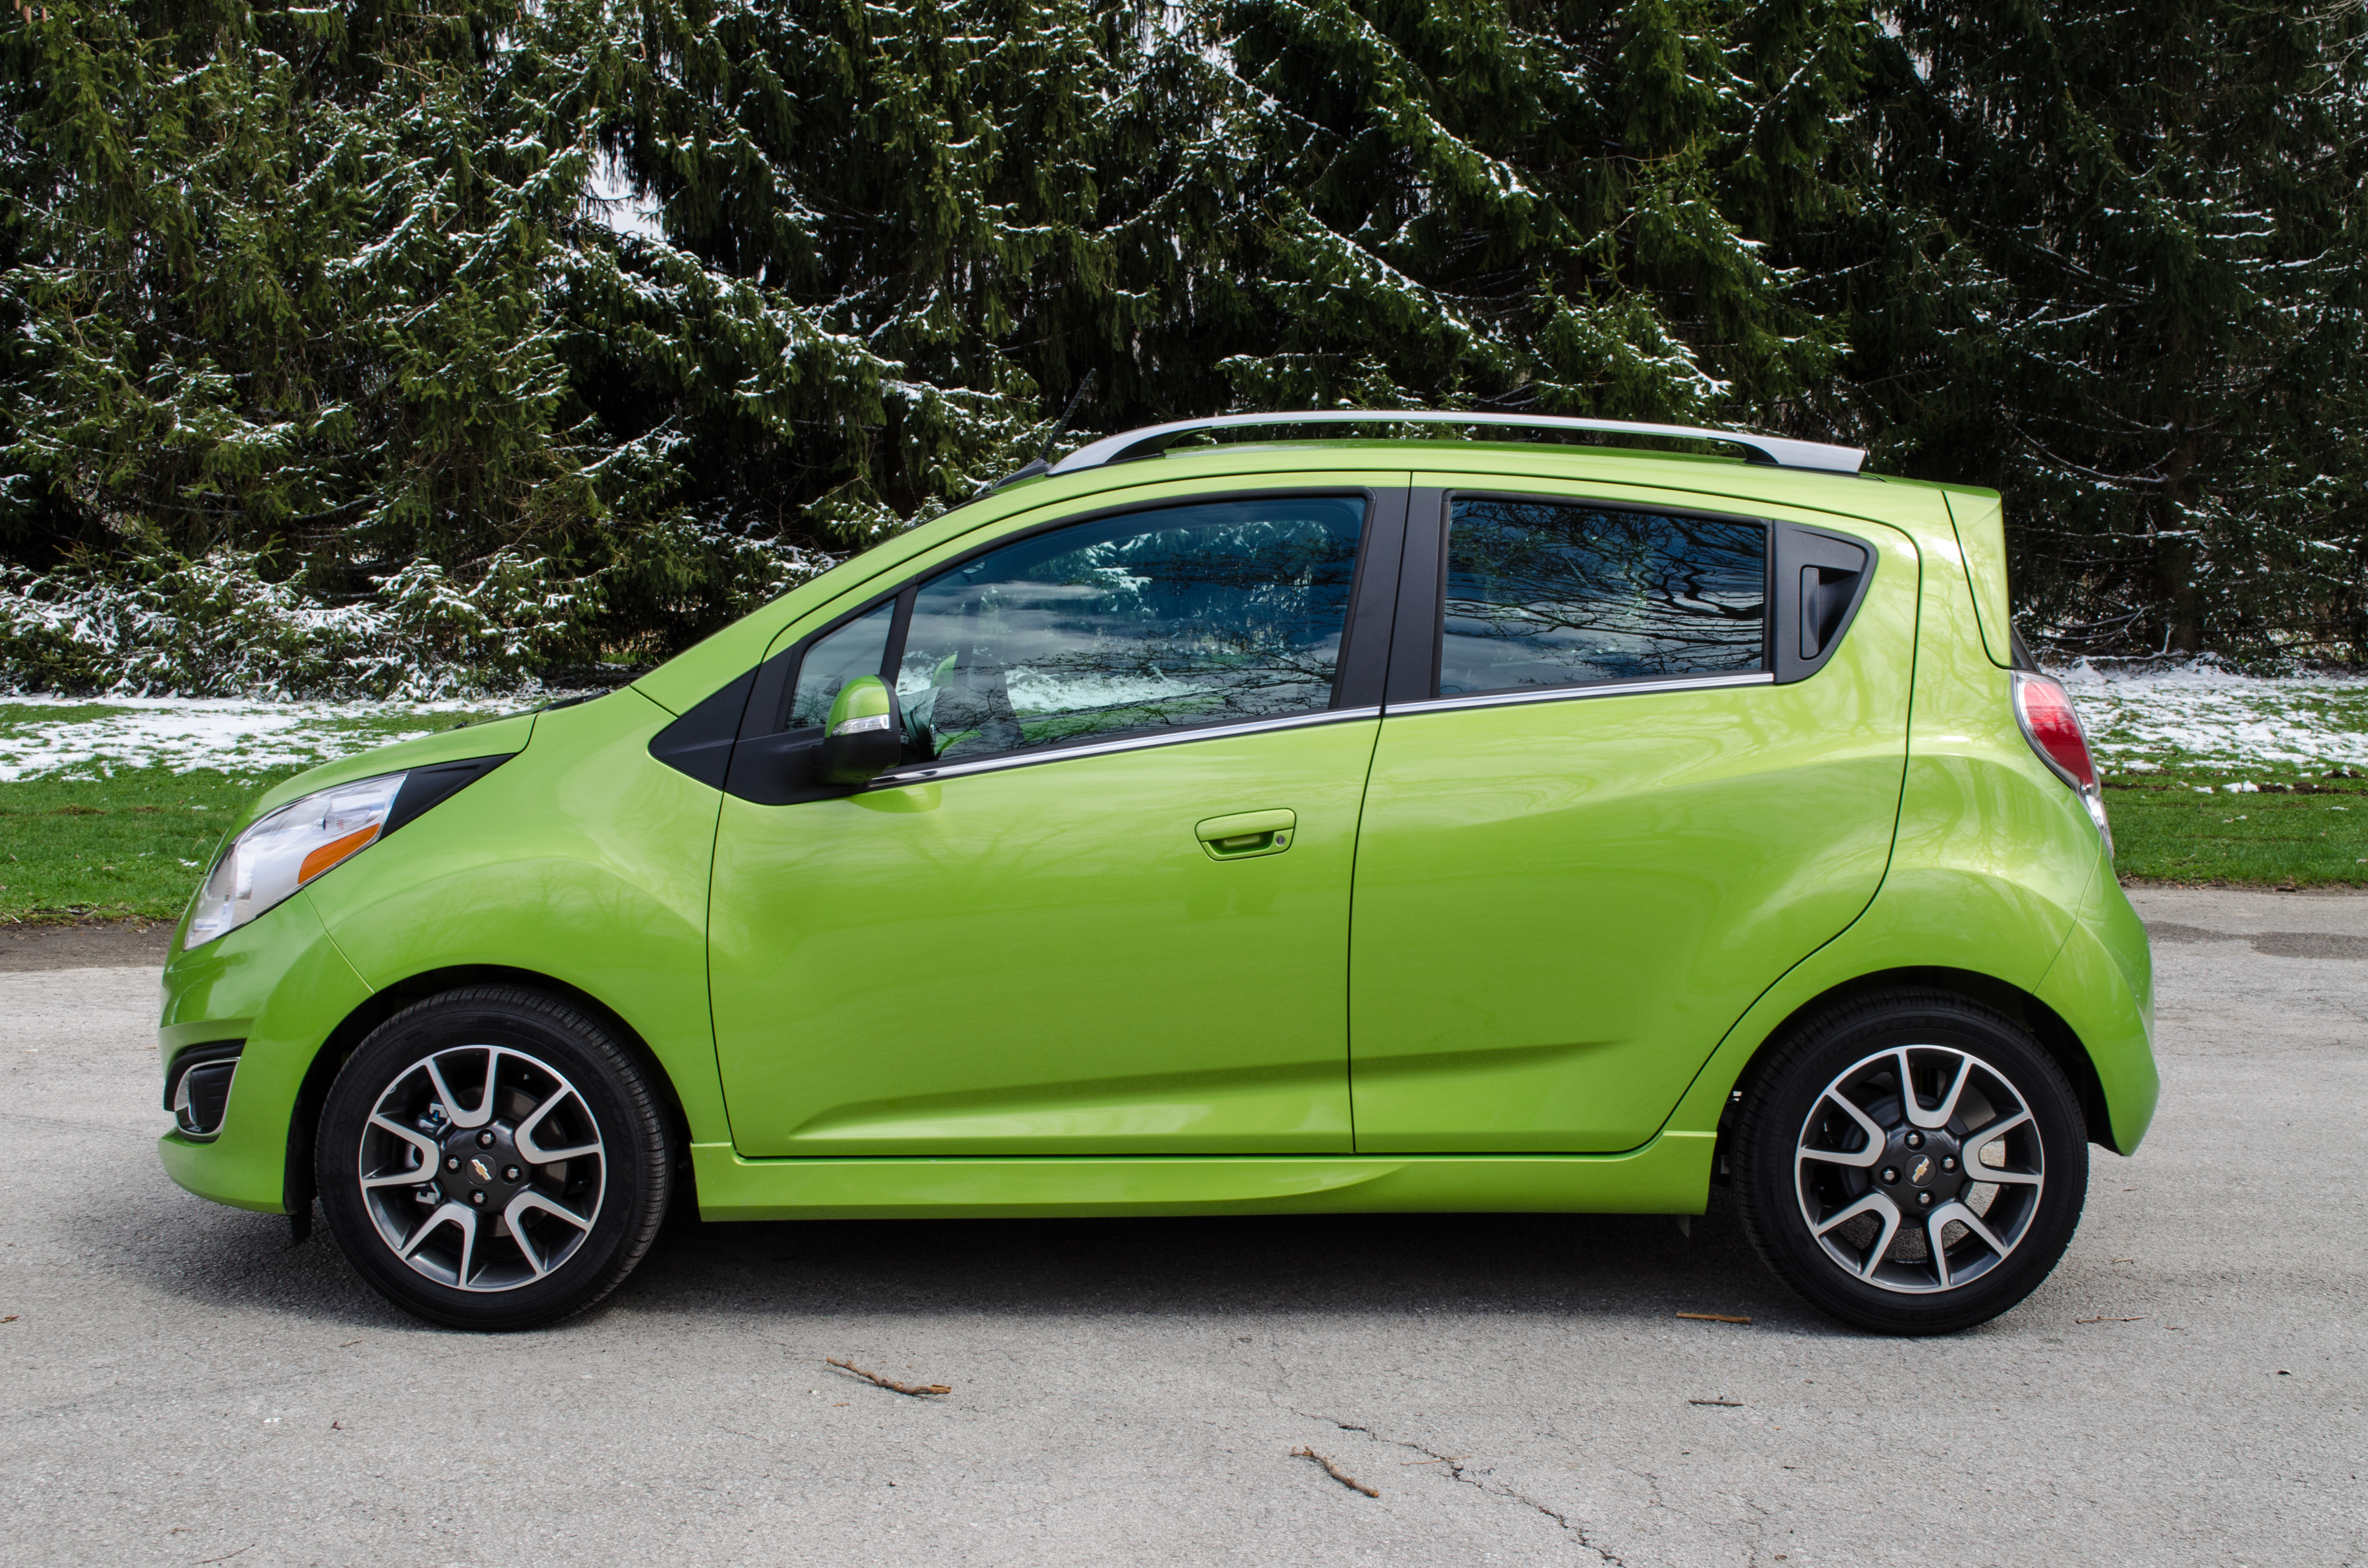 2014 Chevy Spark Review - Motor Review